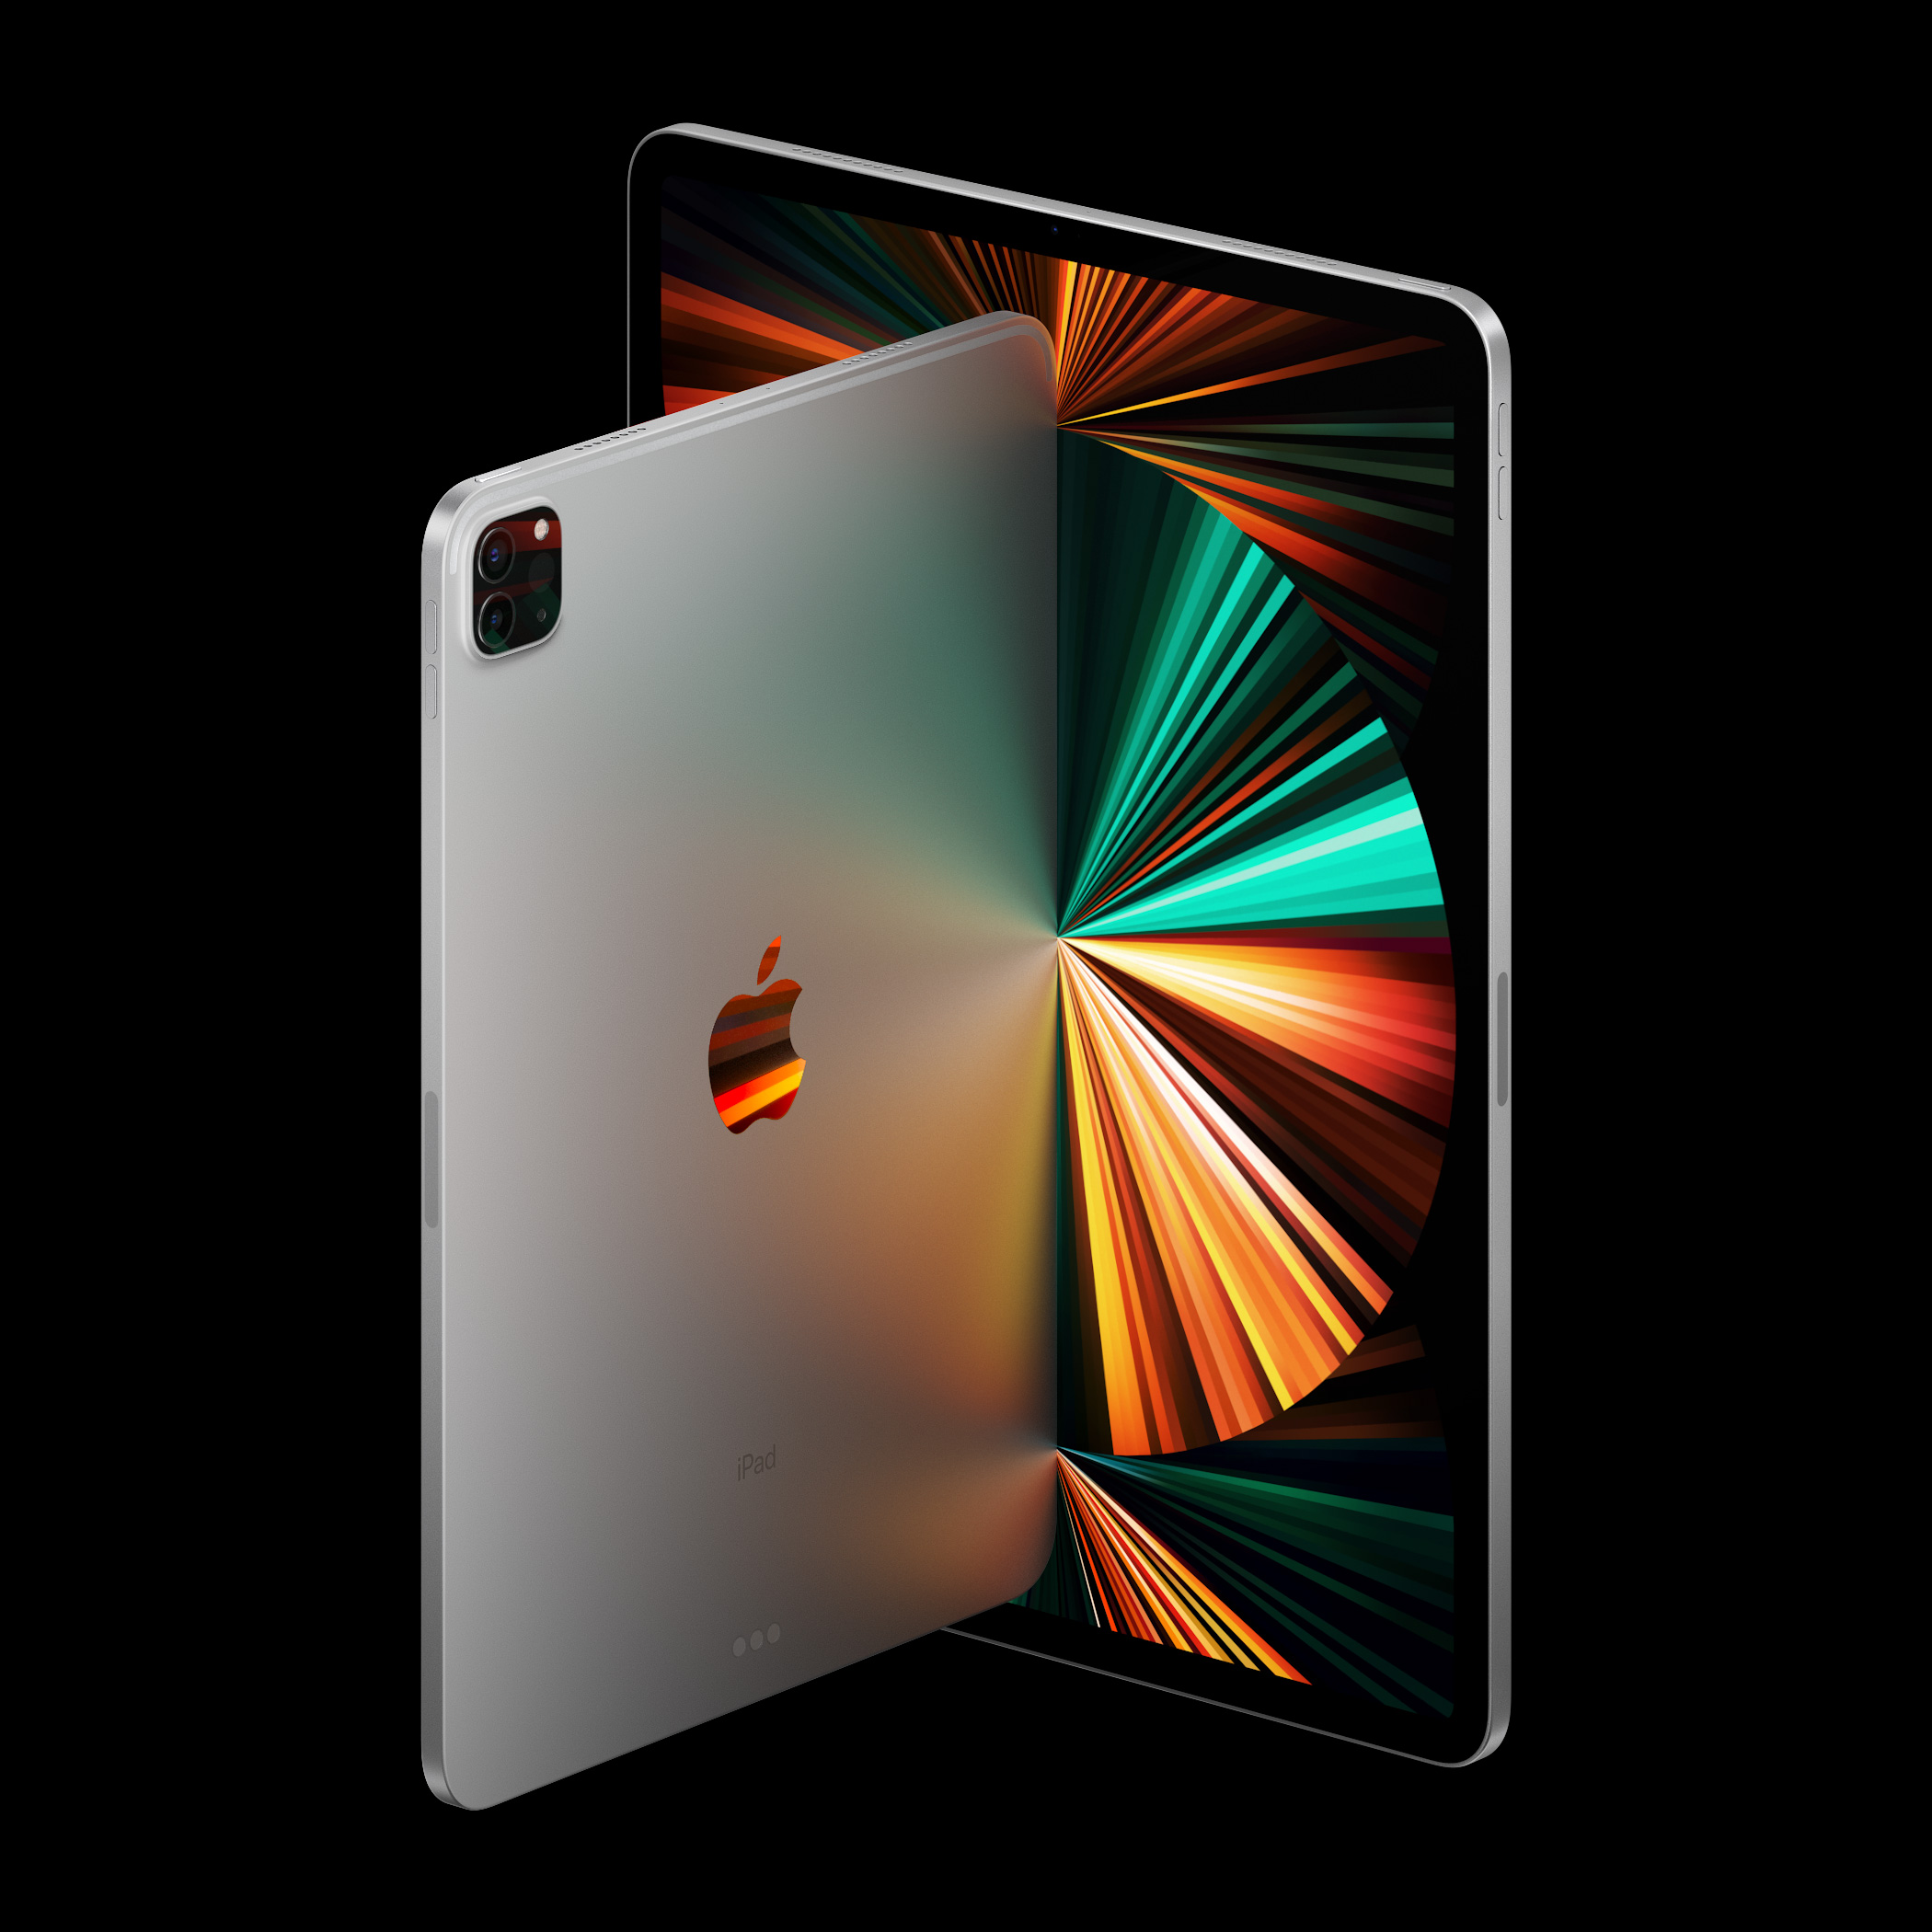 Apple Is Said To Face Continued Delays In Delivering Ipad Pros Bloomberg